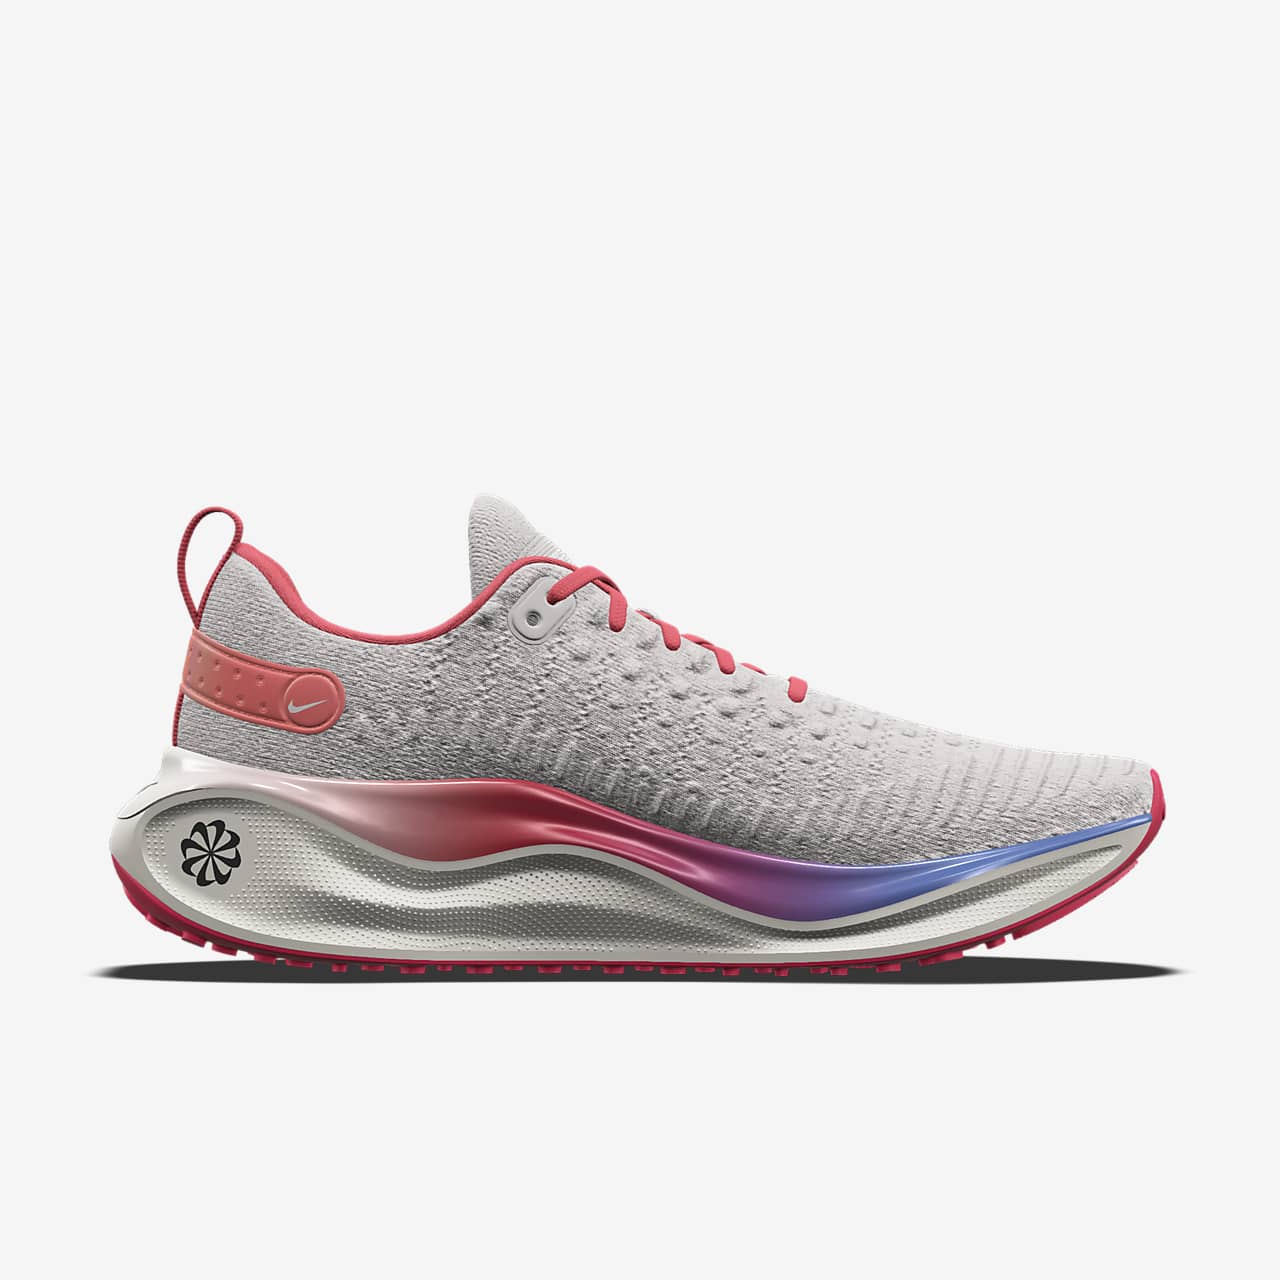 BECOME A BETTER RUNNER WITH THE NEW UA HOVR PHANTOM RN